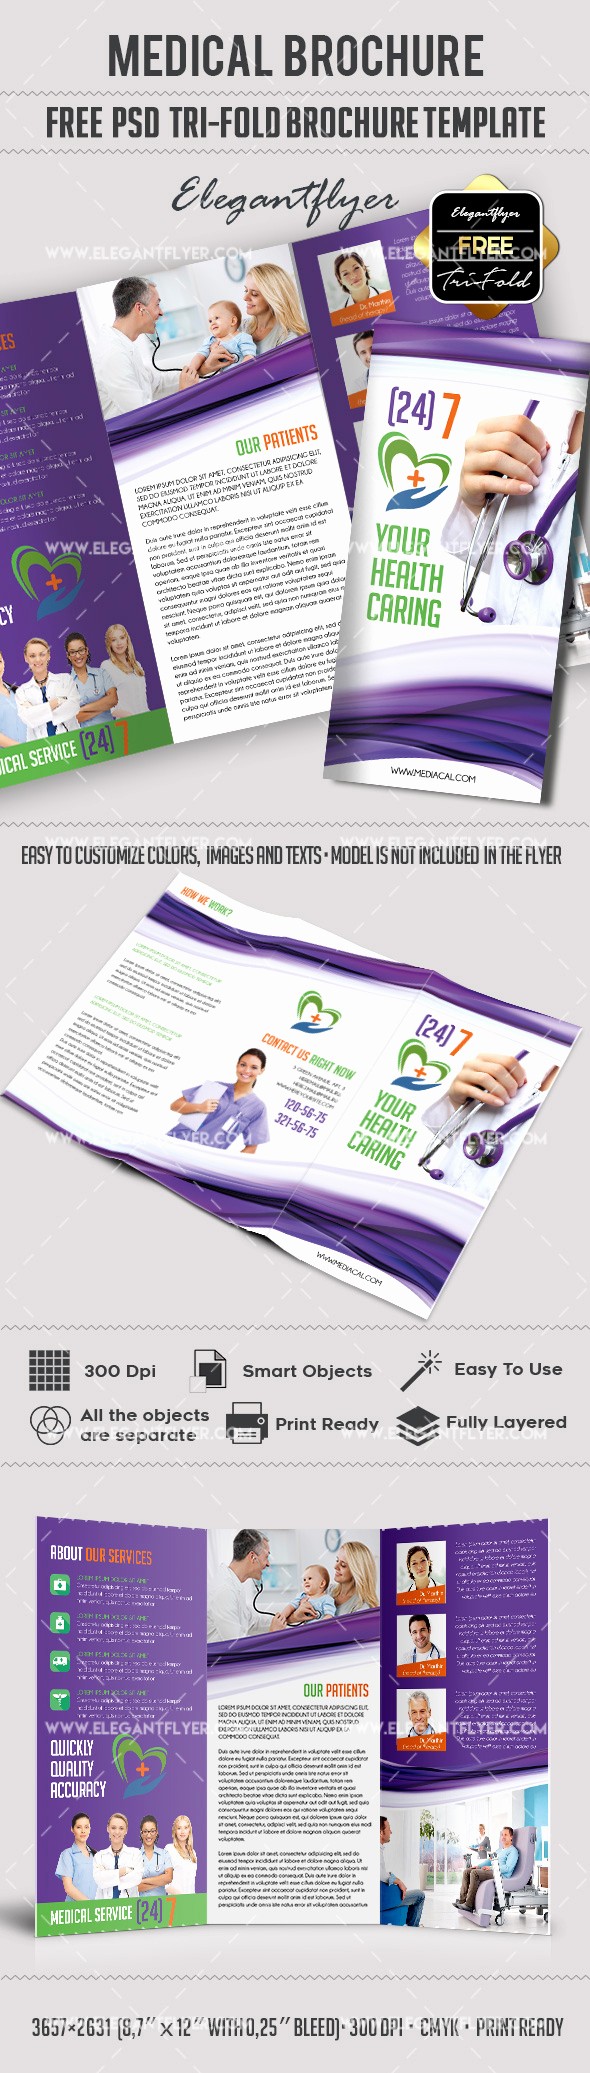 Healthcare Brochure Templates Free Download Inspirational Download Medical – Free Tri Fold Psd Brochure Template